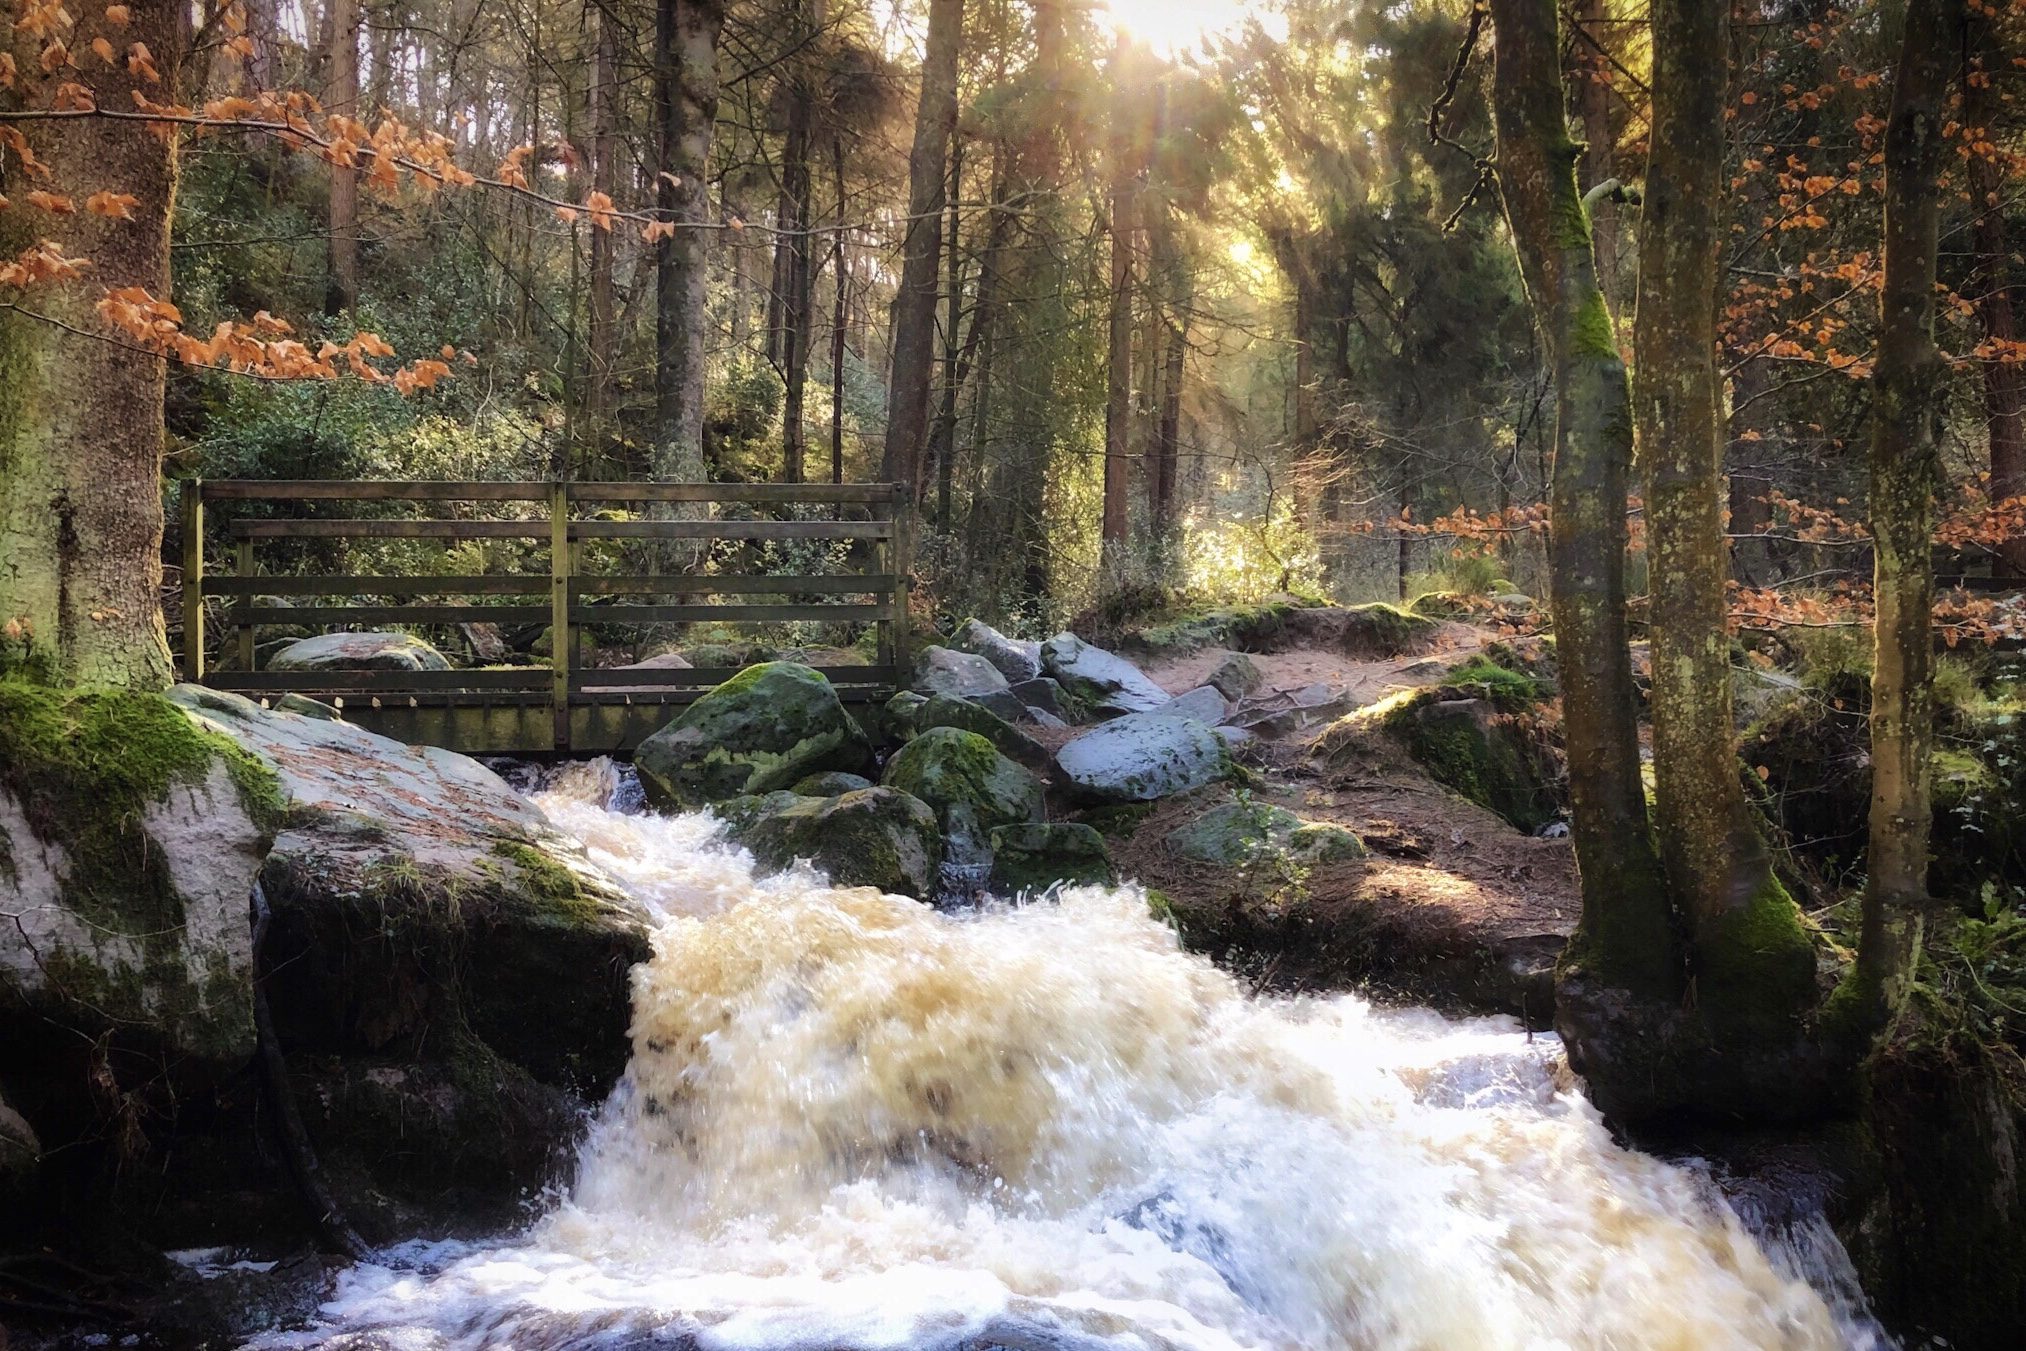 70 Best Days Out in the Peak District: Wyming Brook 3